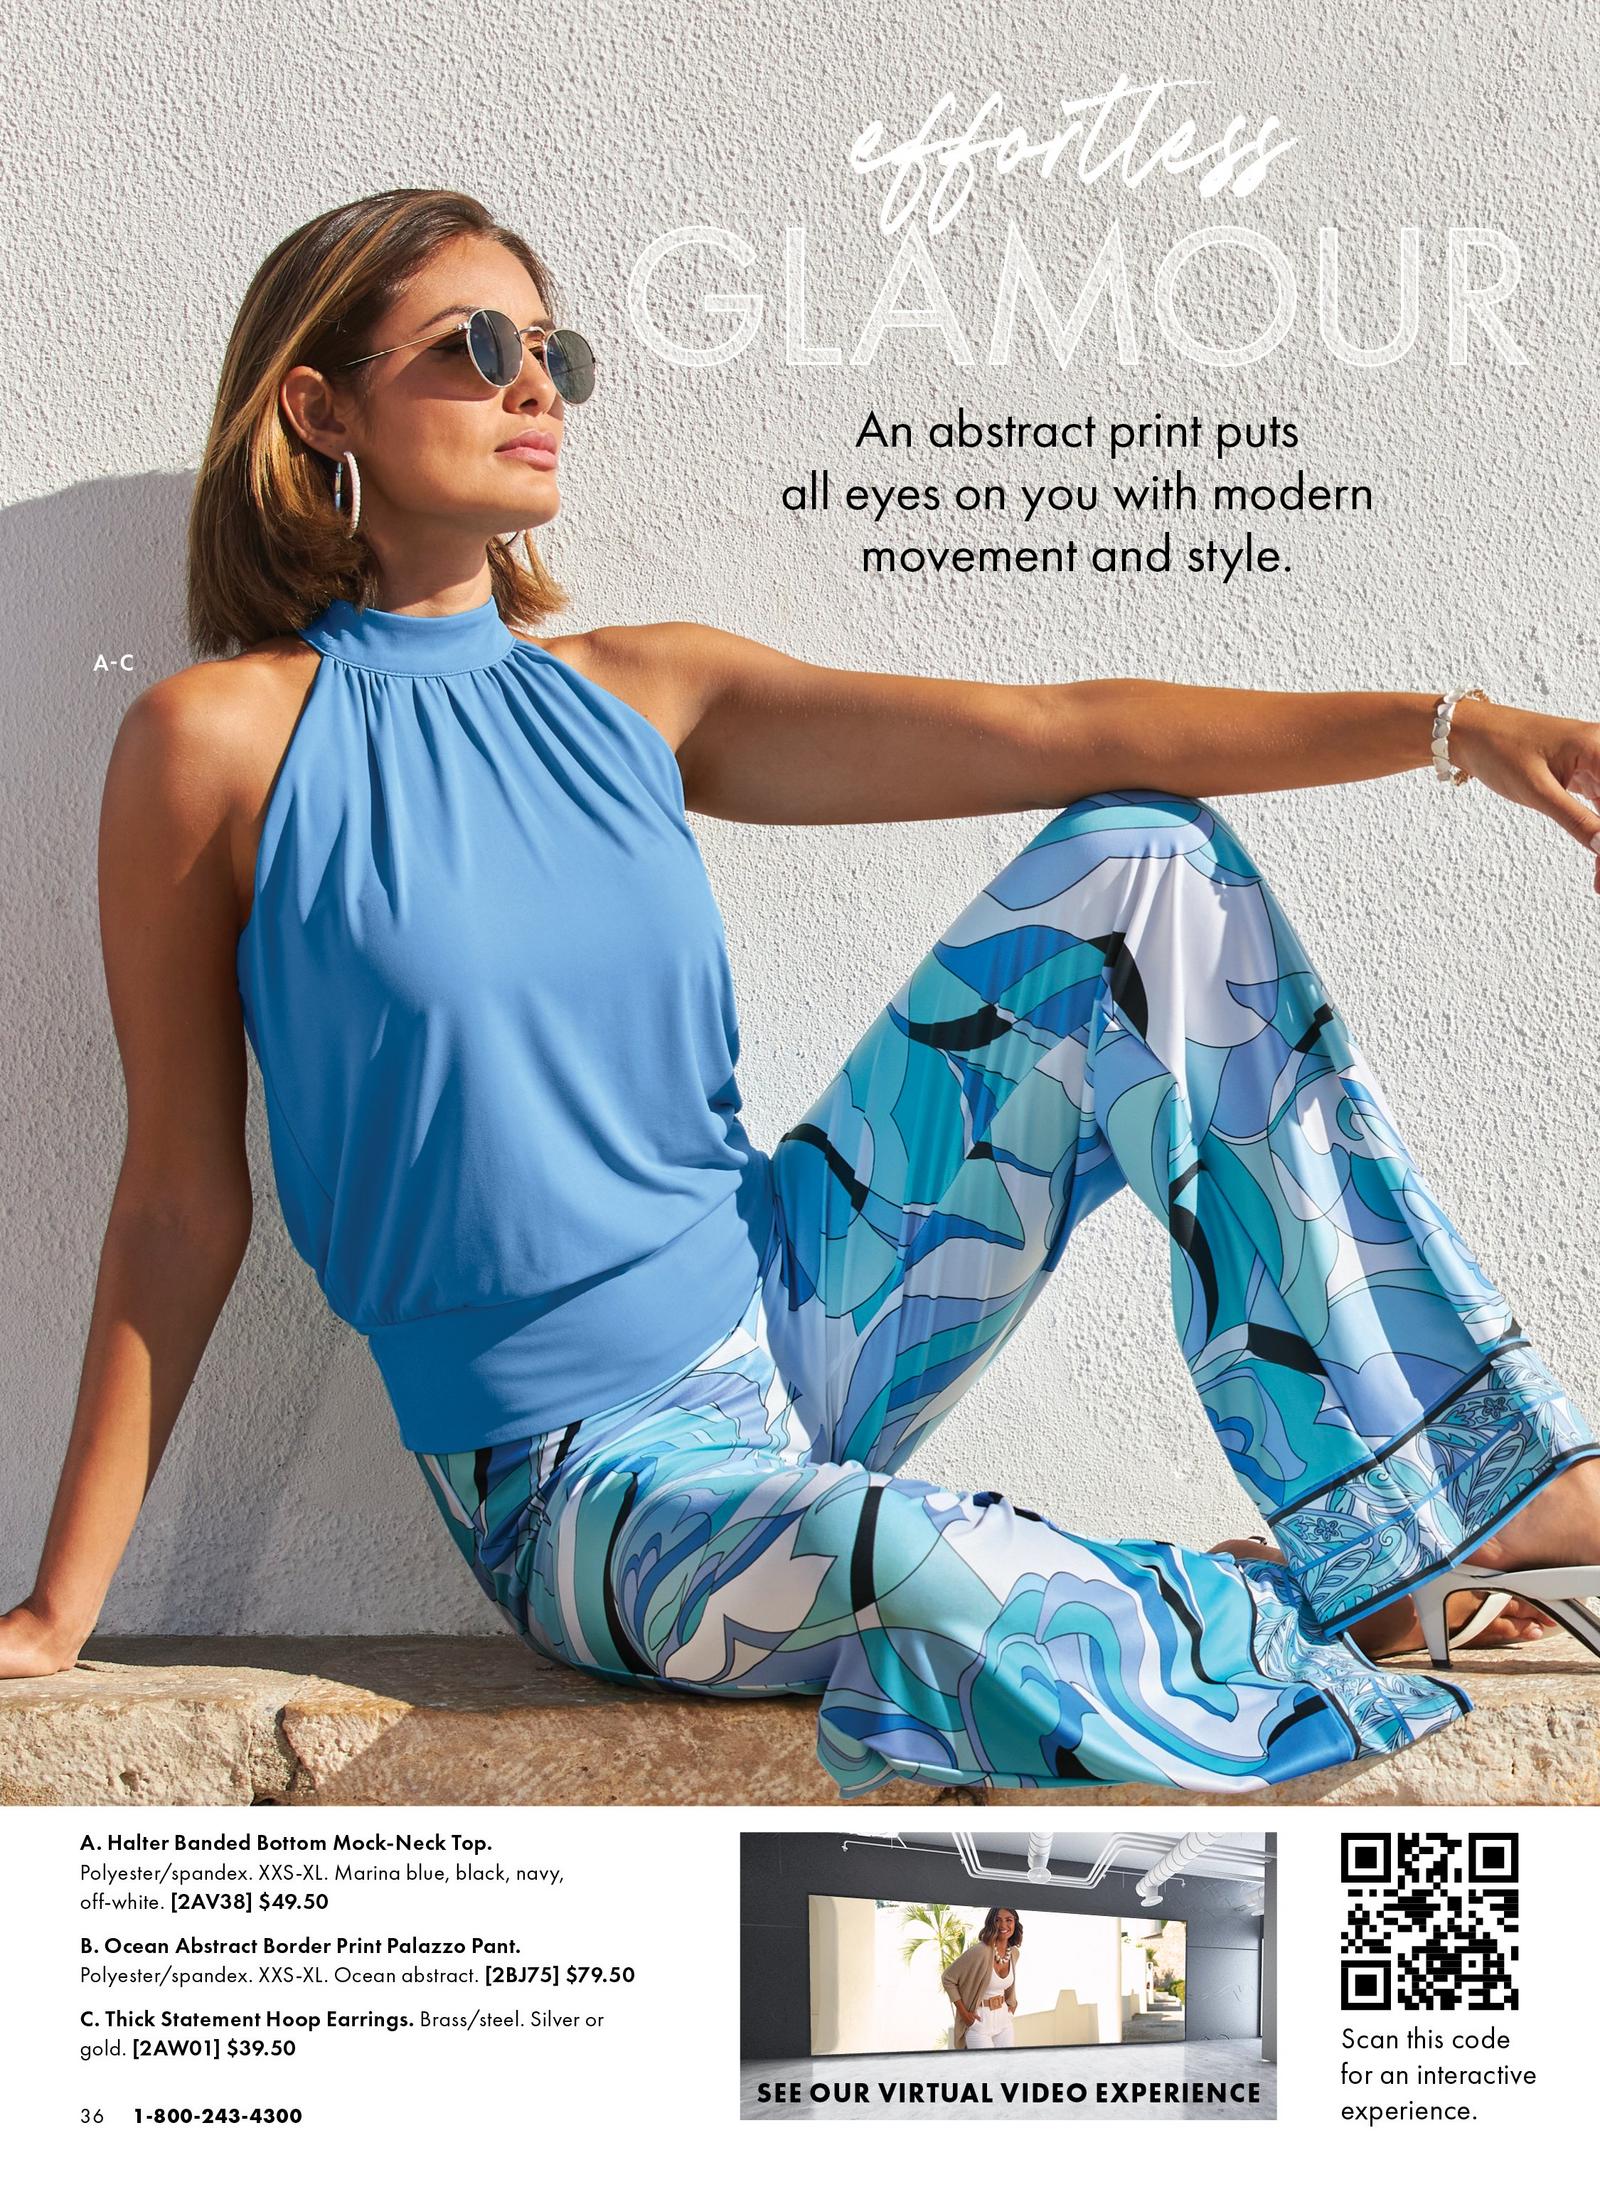 Model is wearing the Halter Banded Bottom Mock-Neck Top in powder blue, the Ocean Abstract Border Print Palazzo Pant in a blue, periwinkle, black and white abstract print and the Thick Statement Hoop Earrings in silver.